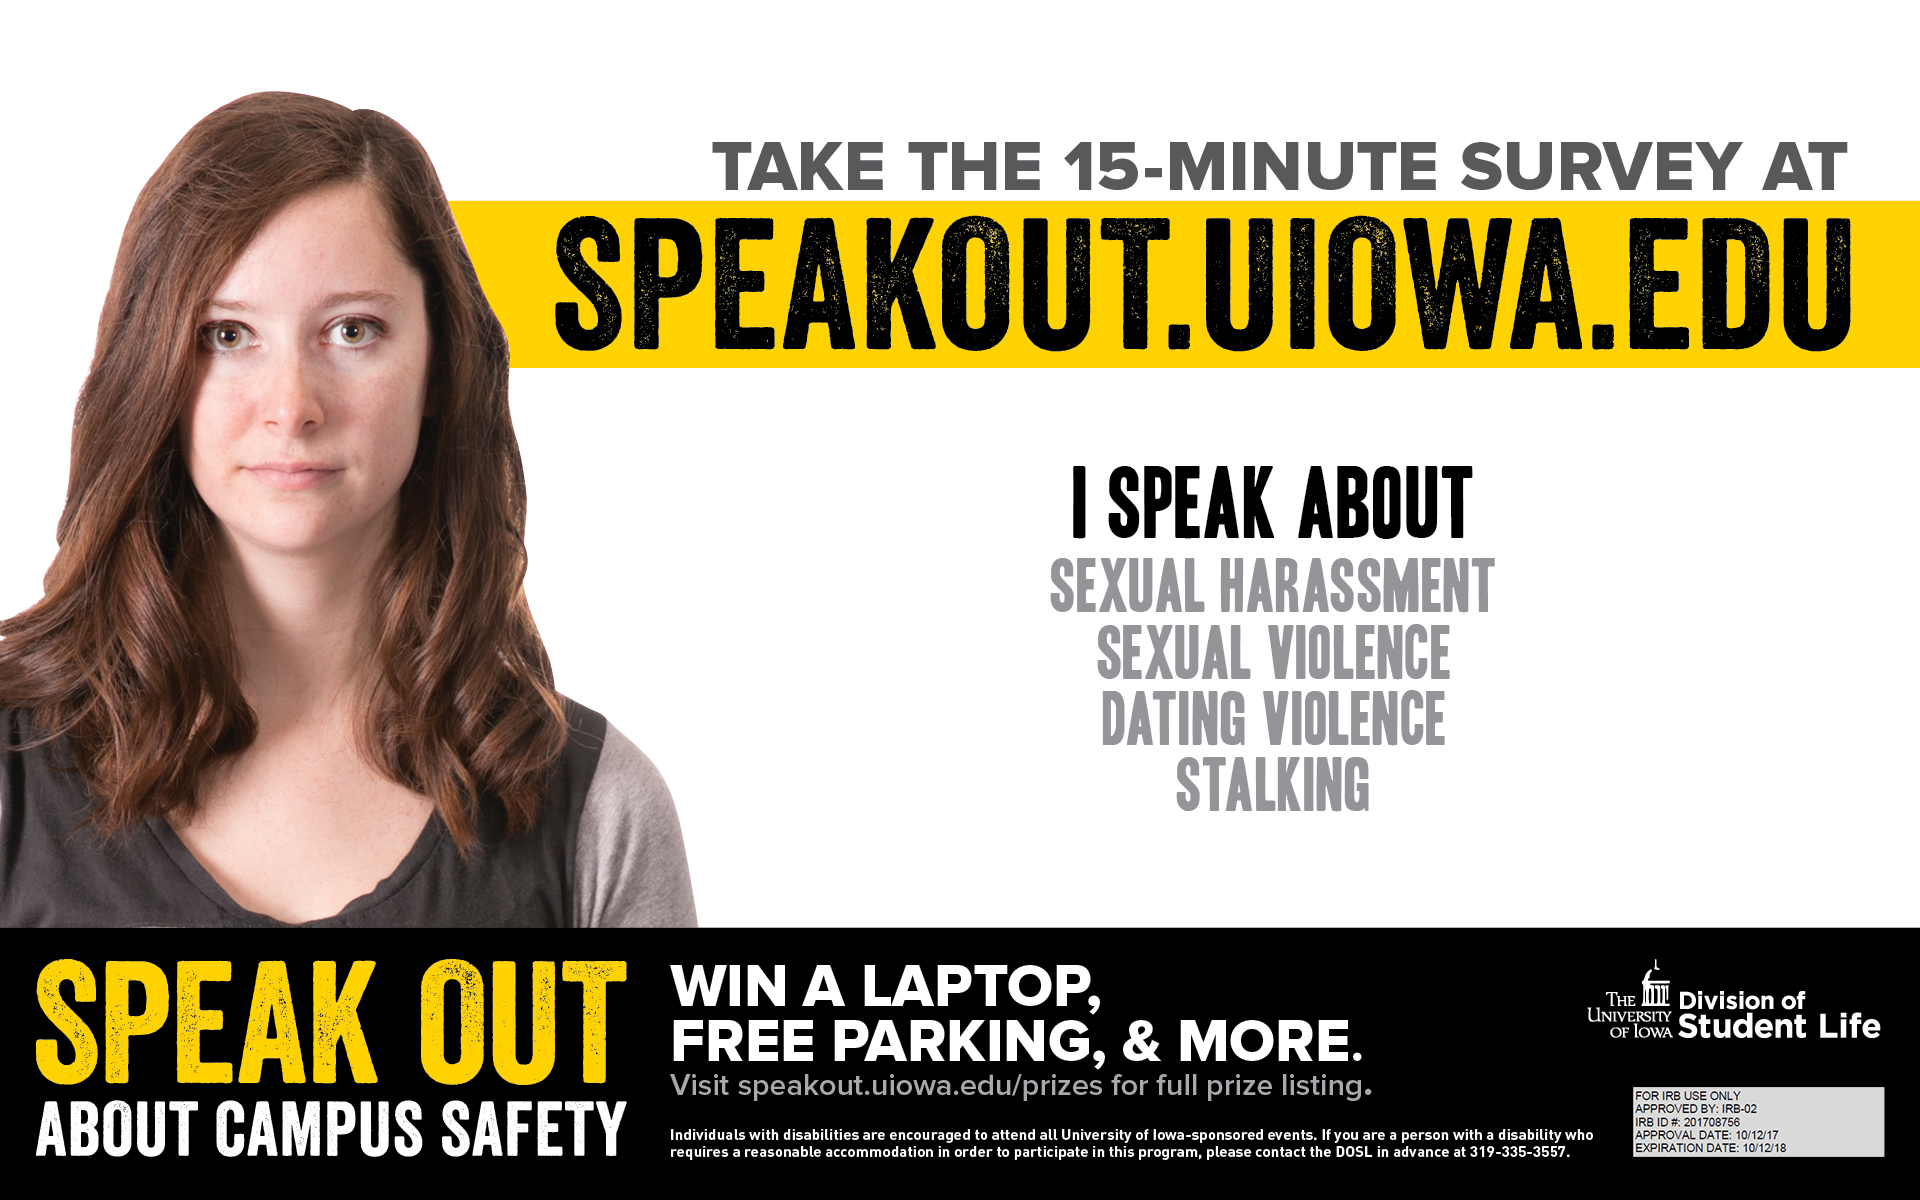 Take the 15-minute survey at speakout.uiowa.edu. I speak about sexual harassment, sexual violence, dating violence, and stalking. Speak out about campus safety. Win a laptop, free parking and more.